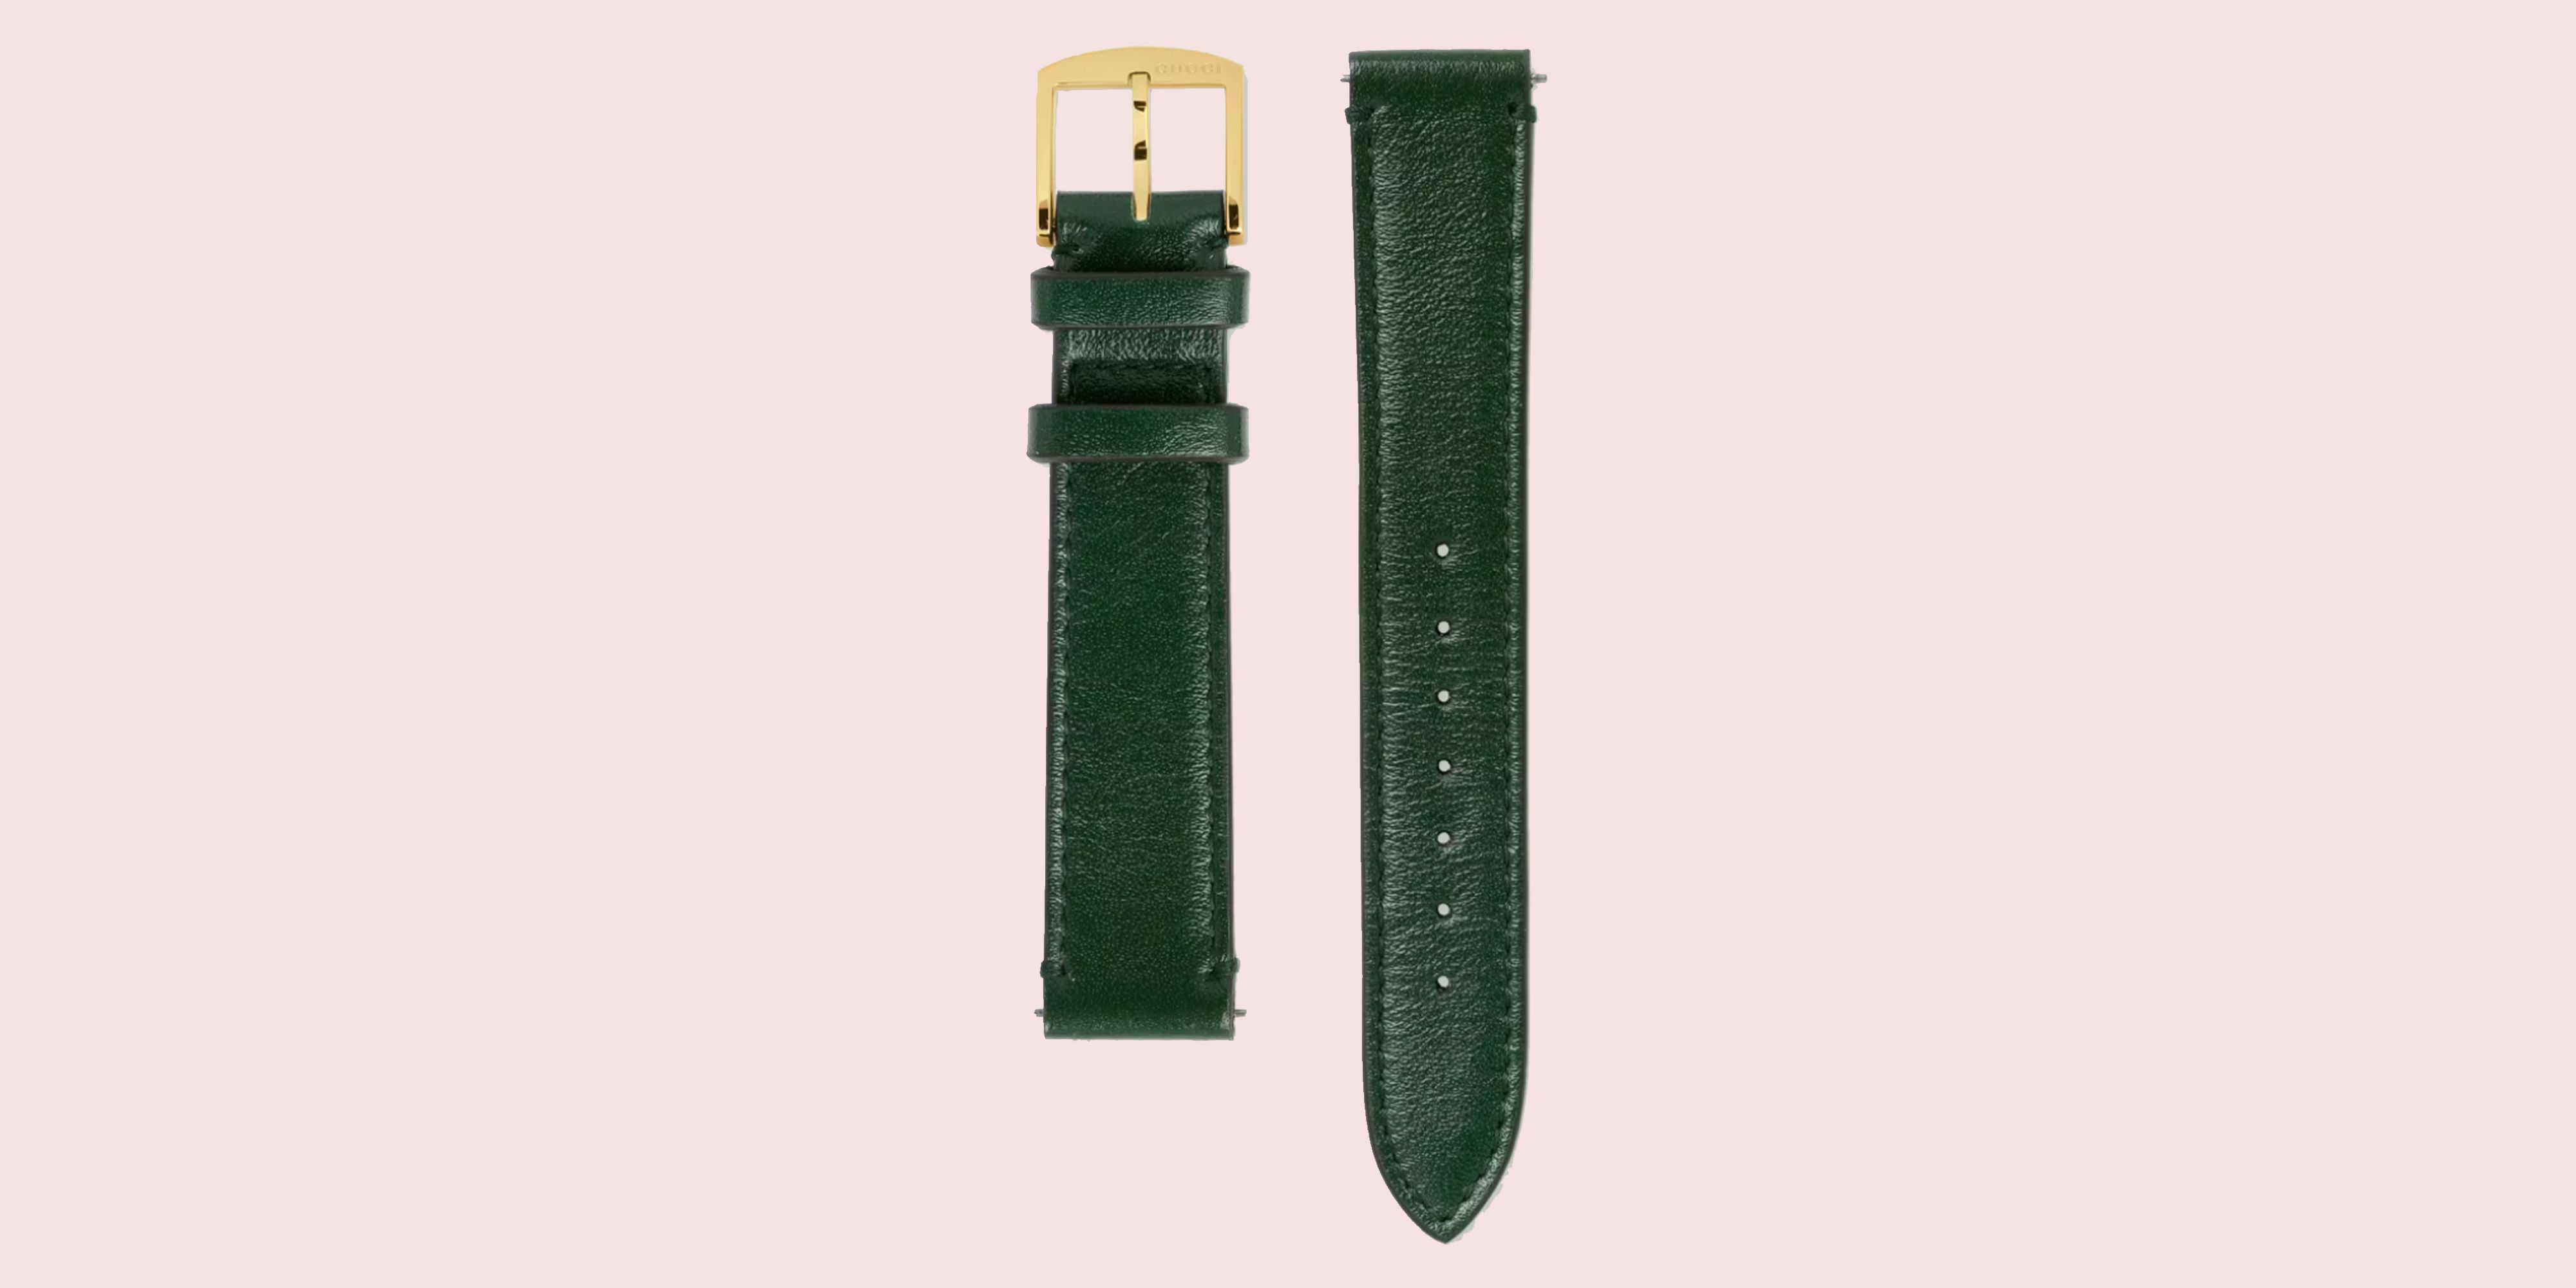 The Best Leather Watch Straps for Every Type of Watch